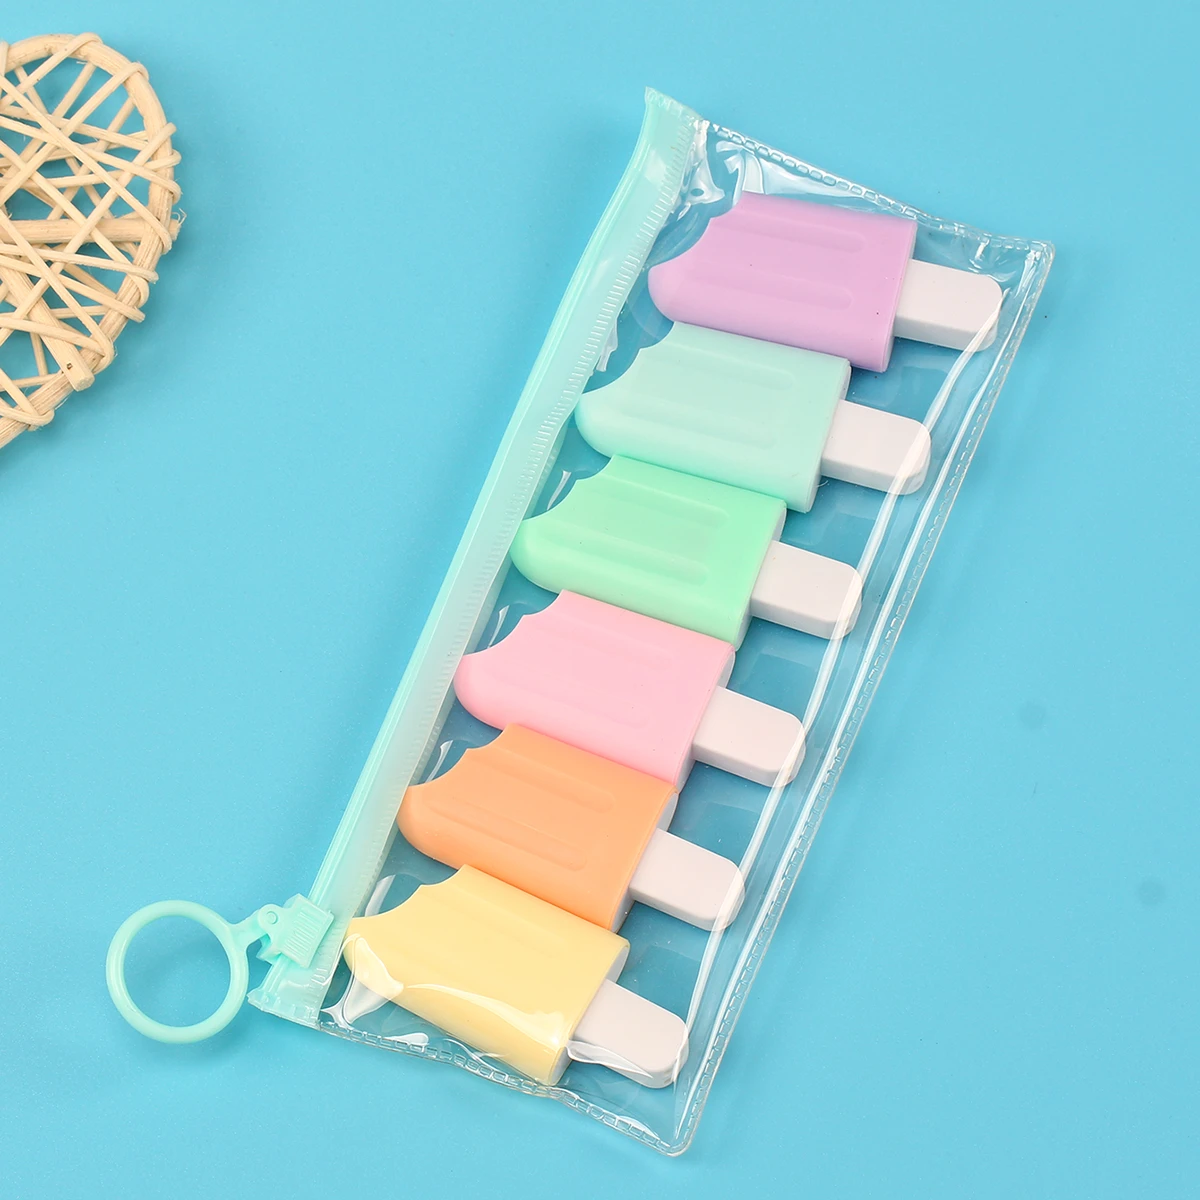 6 Pieces /Pack Lytwtw's Cute Kawaii Iscream Ice Cream Candy Color Highlighter Office School Supplies Gift